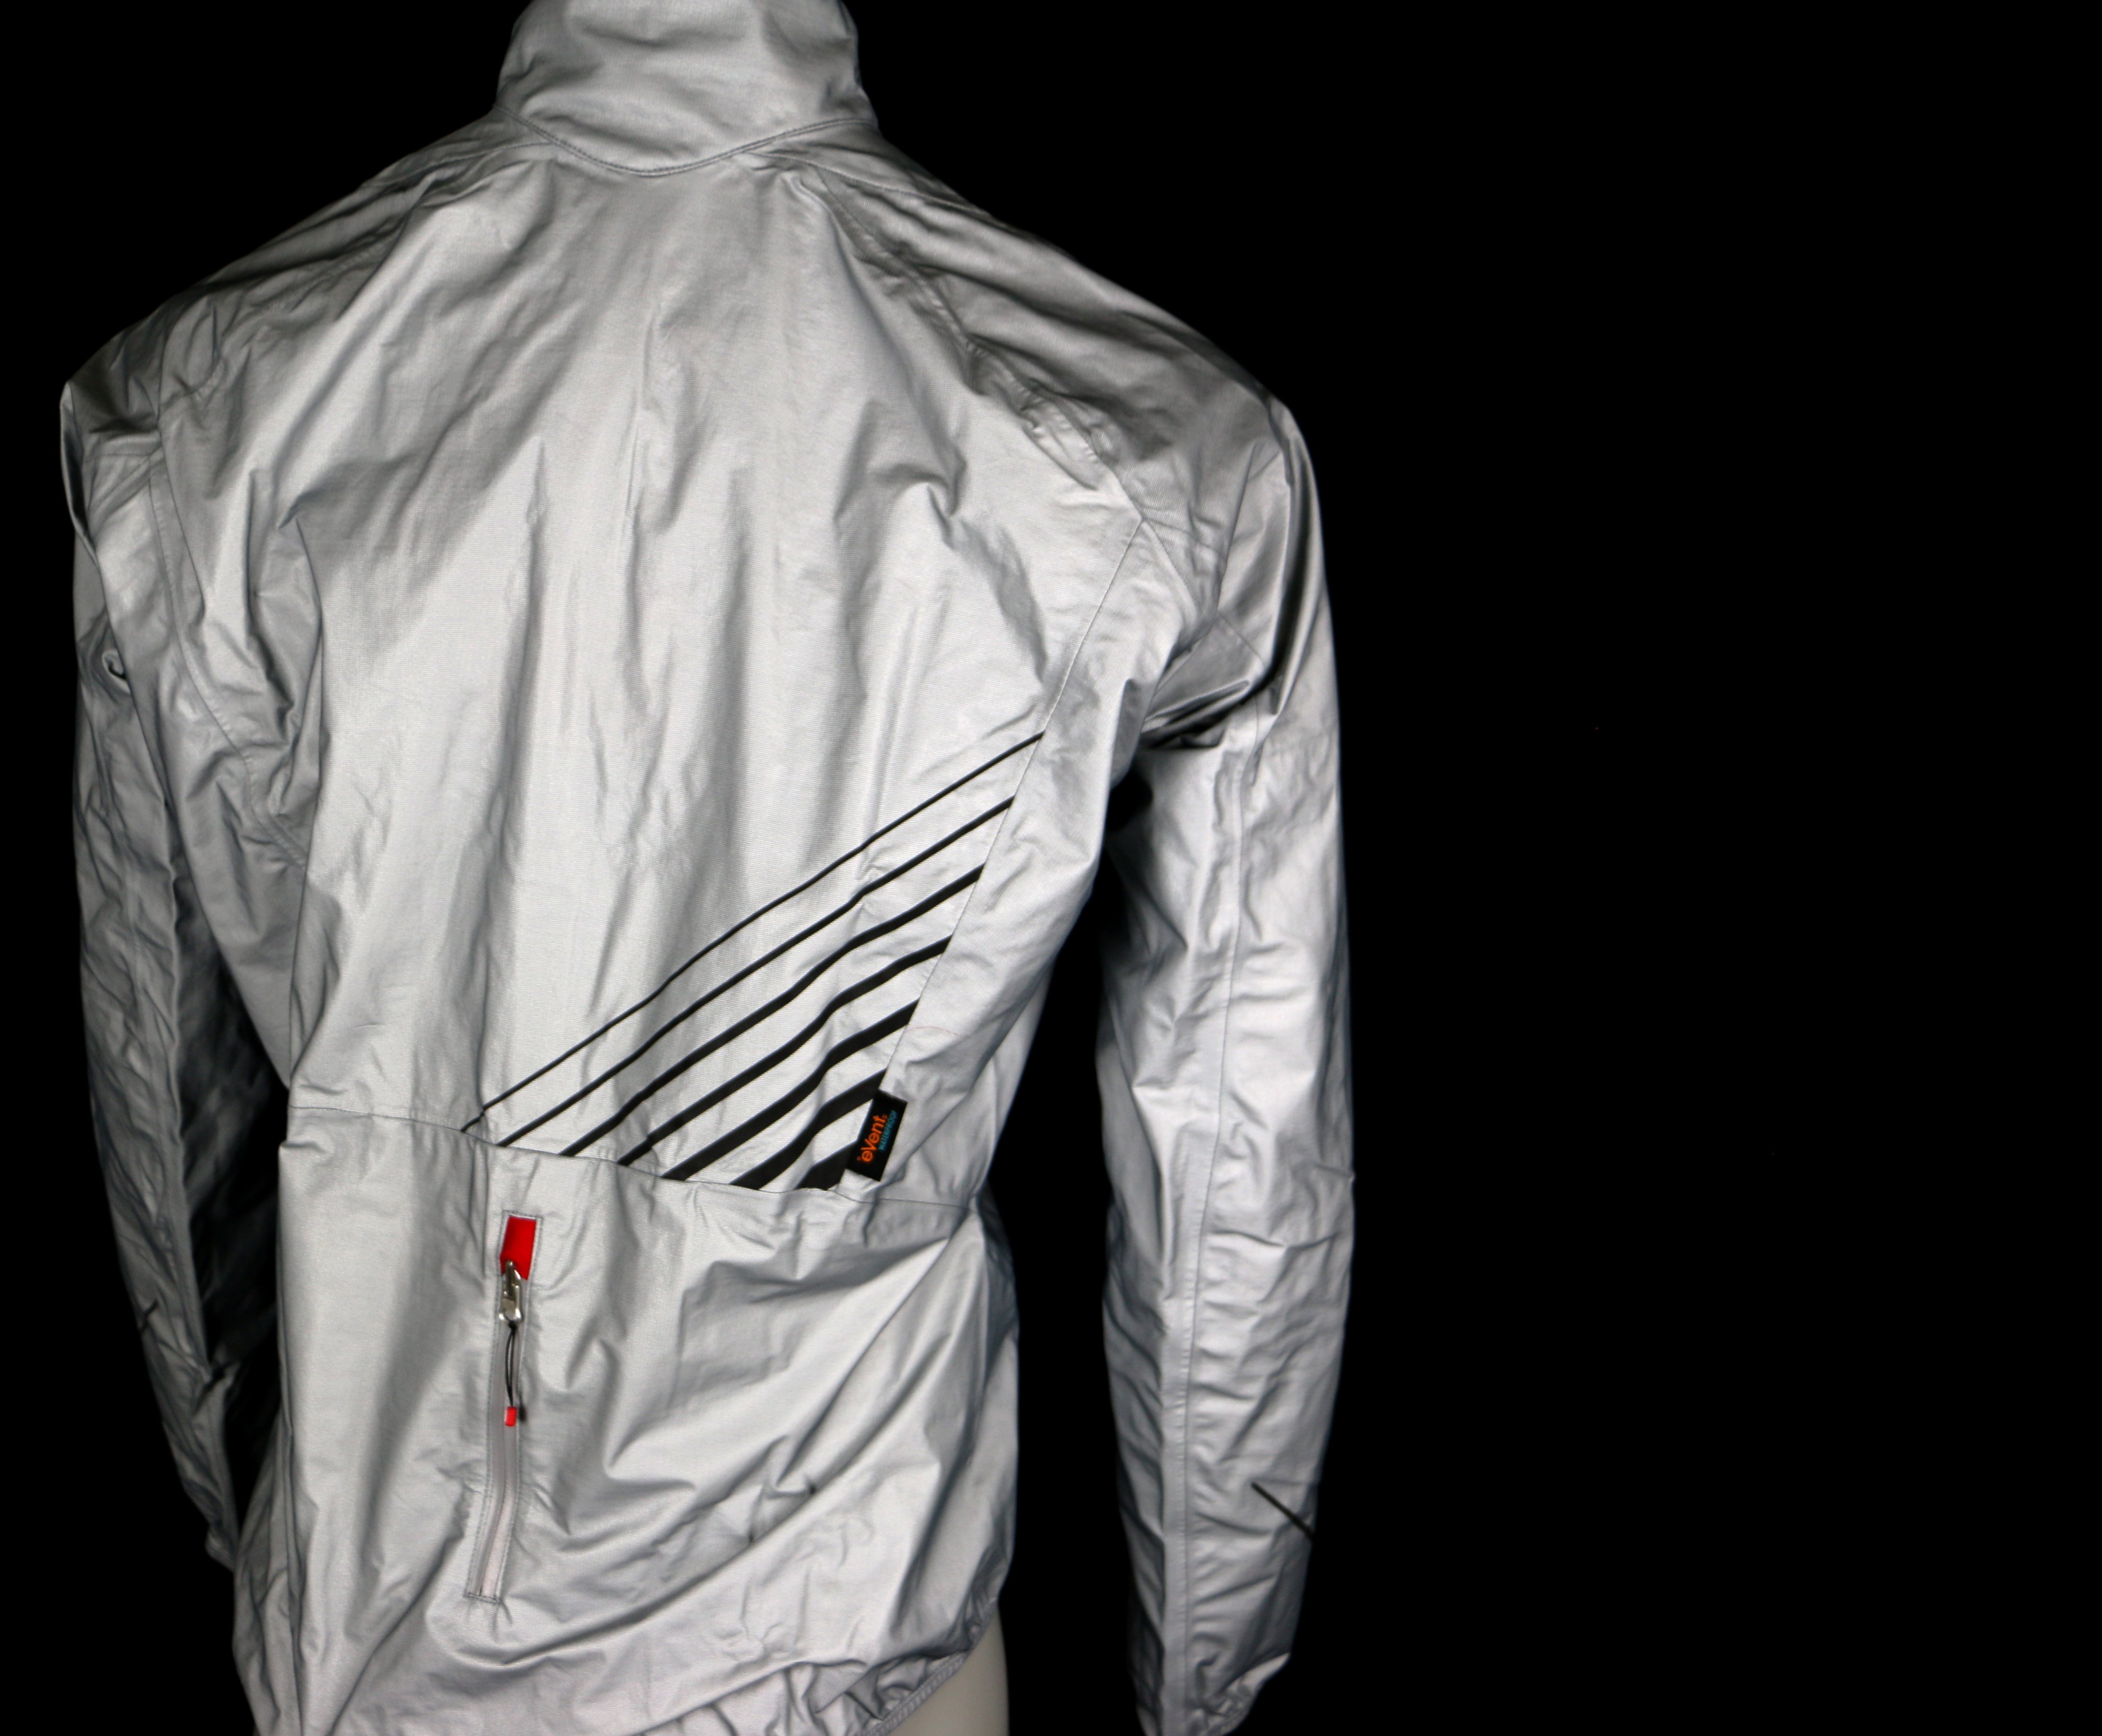 specialized deflect sl jacket review